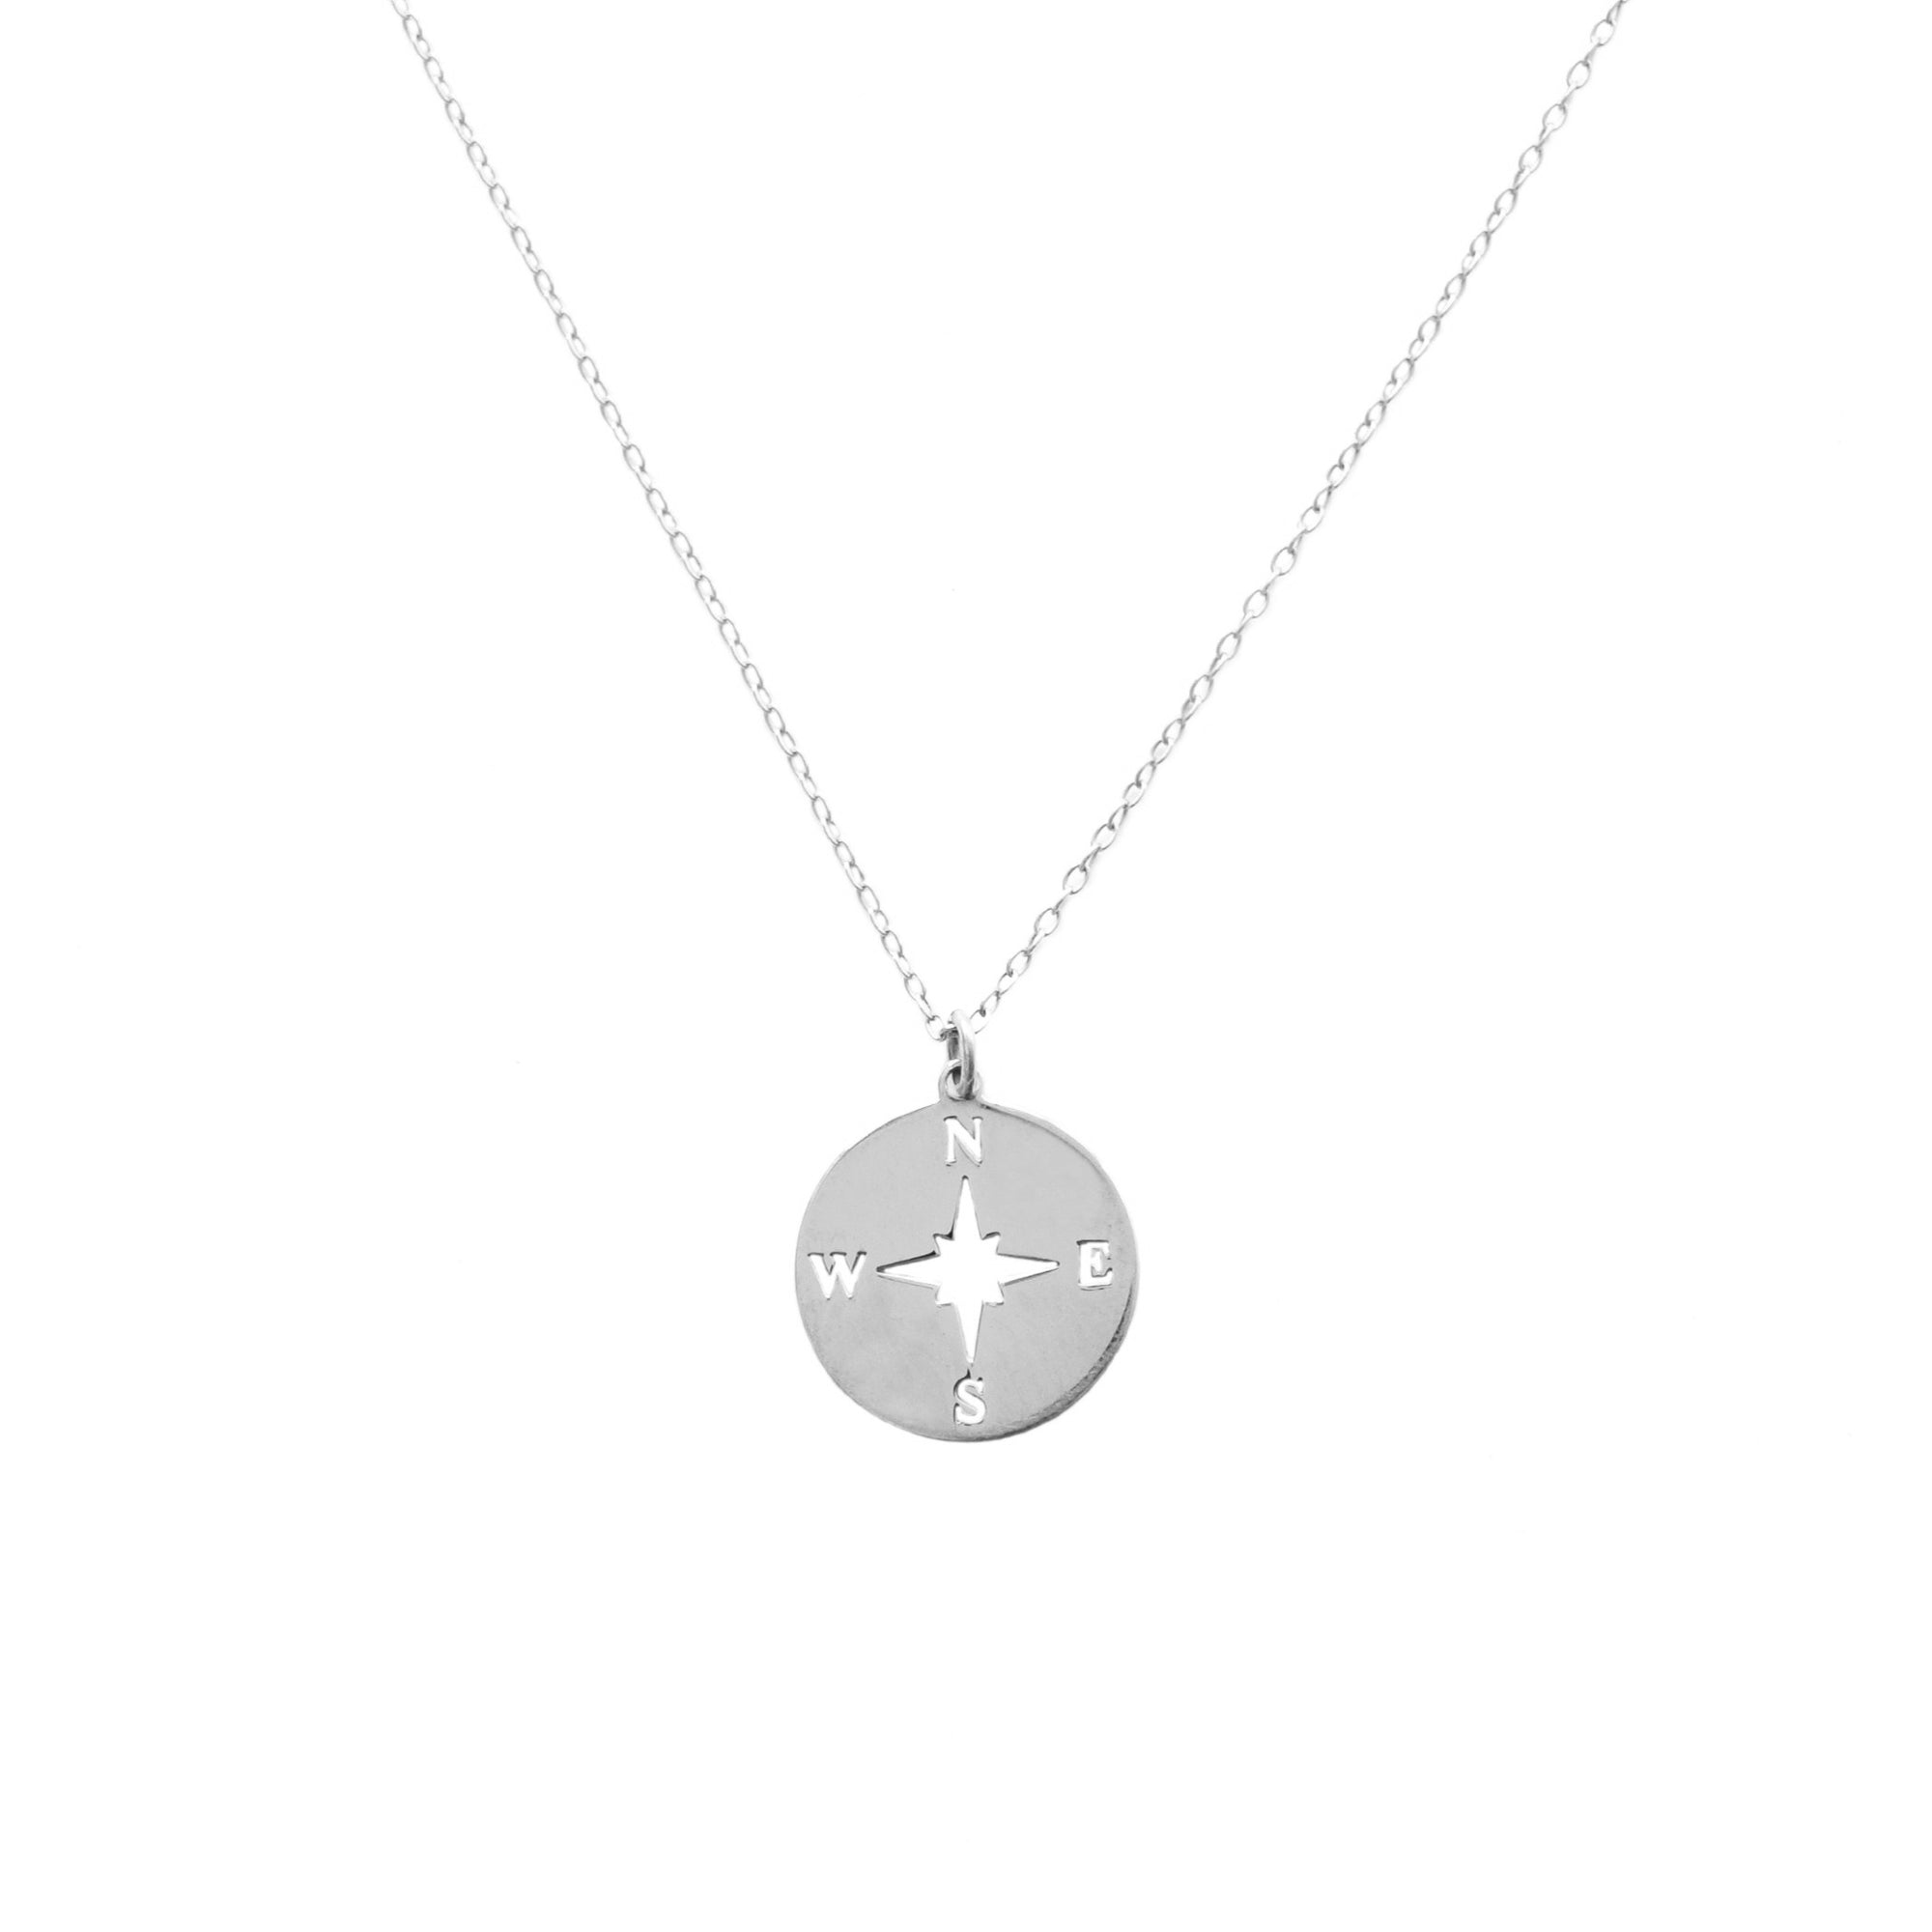 Compass rose silver - 15 mm - ByMirelae